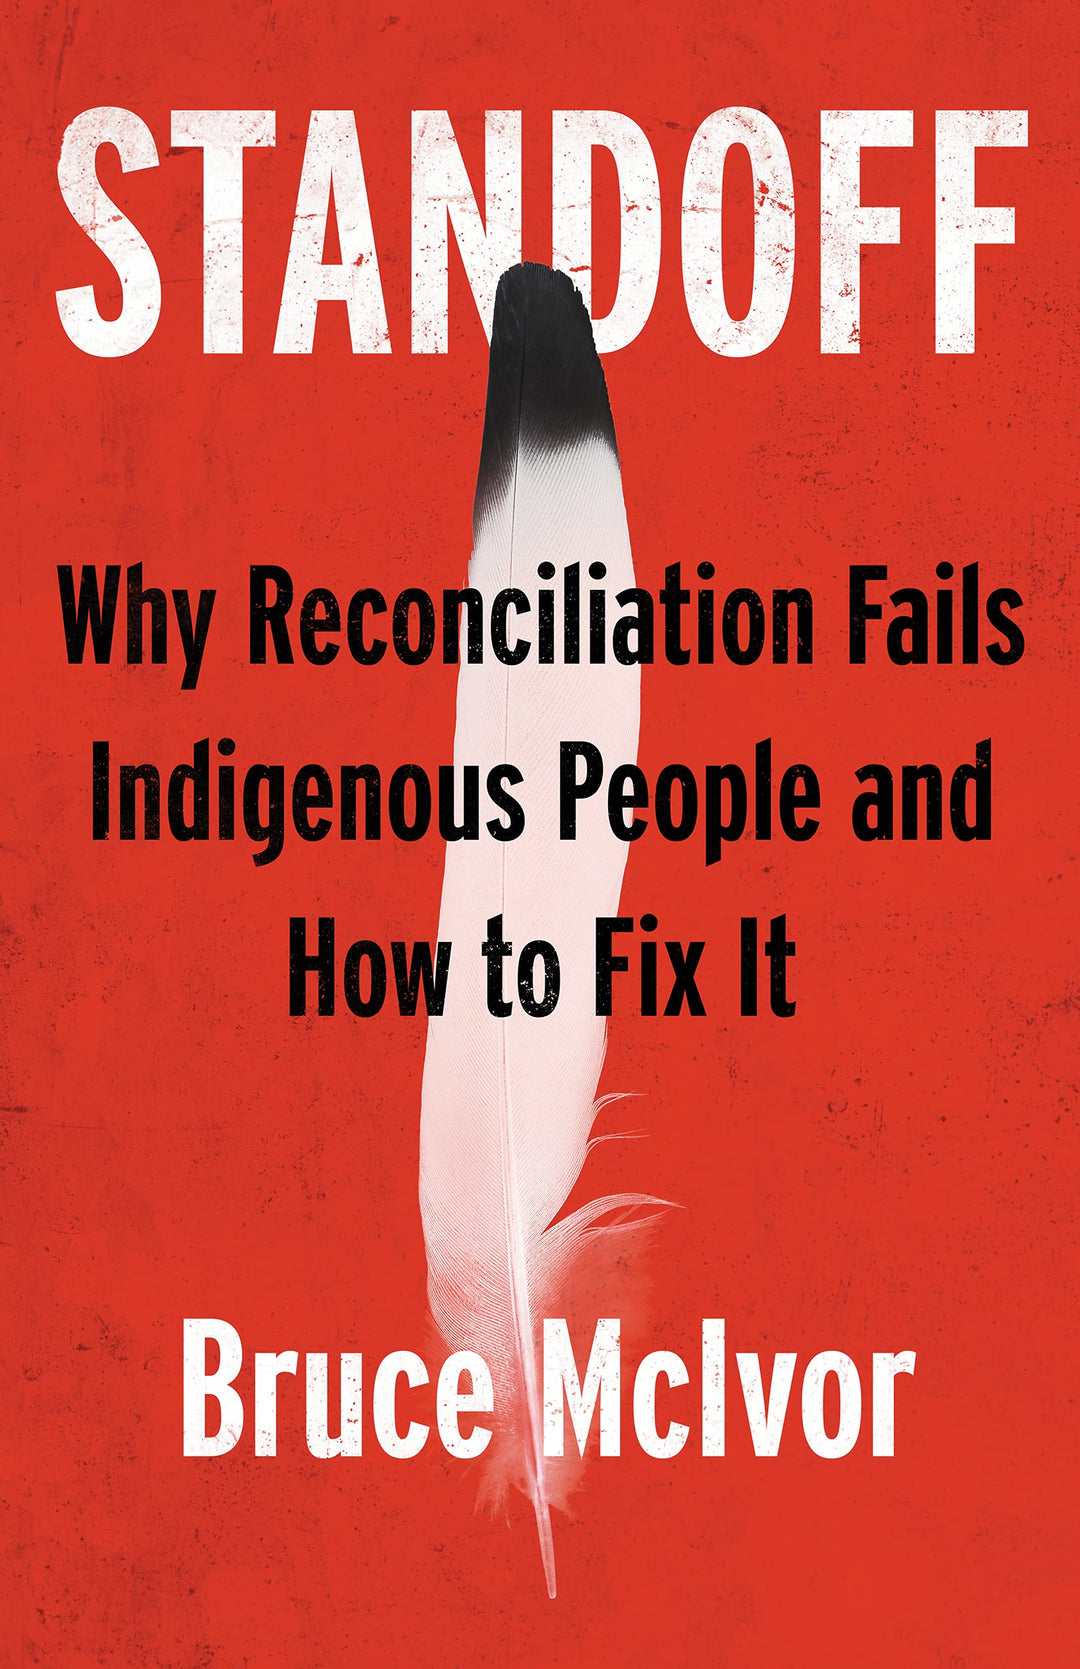 Standoff: Why Reconciliation Fails Indigenous People and How to Fix It by Bruce McIvor